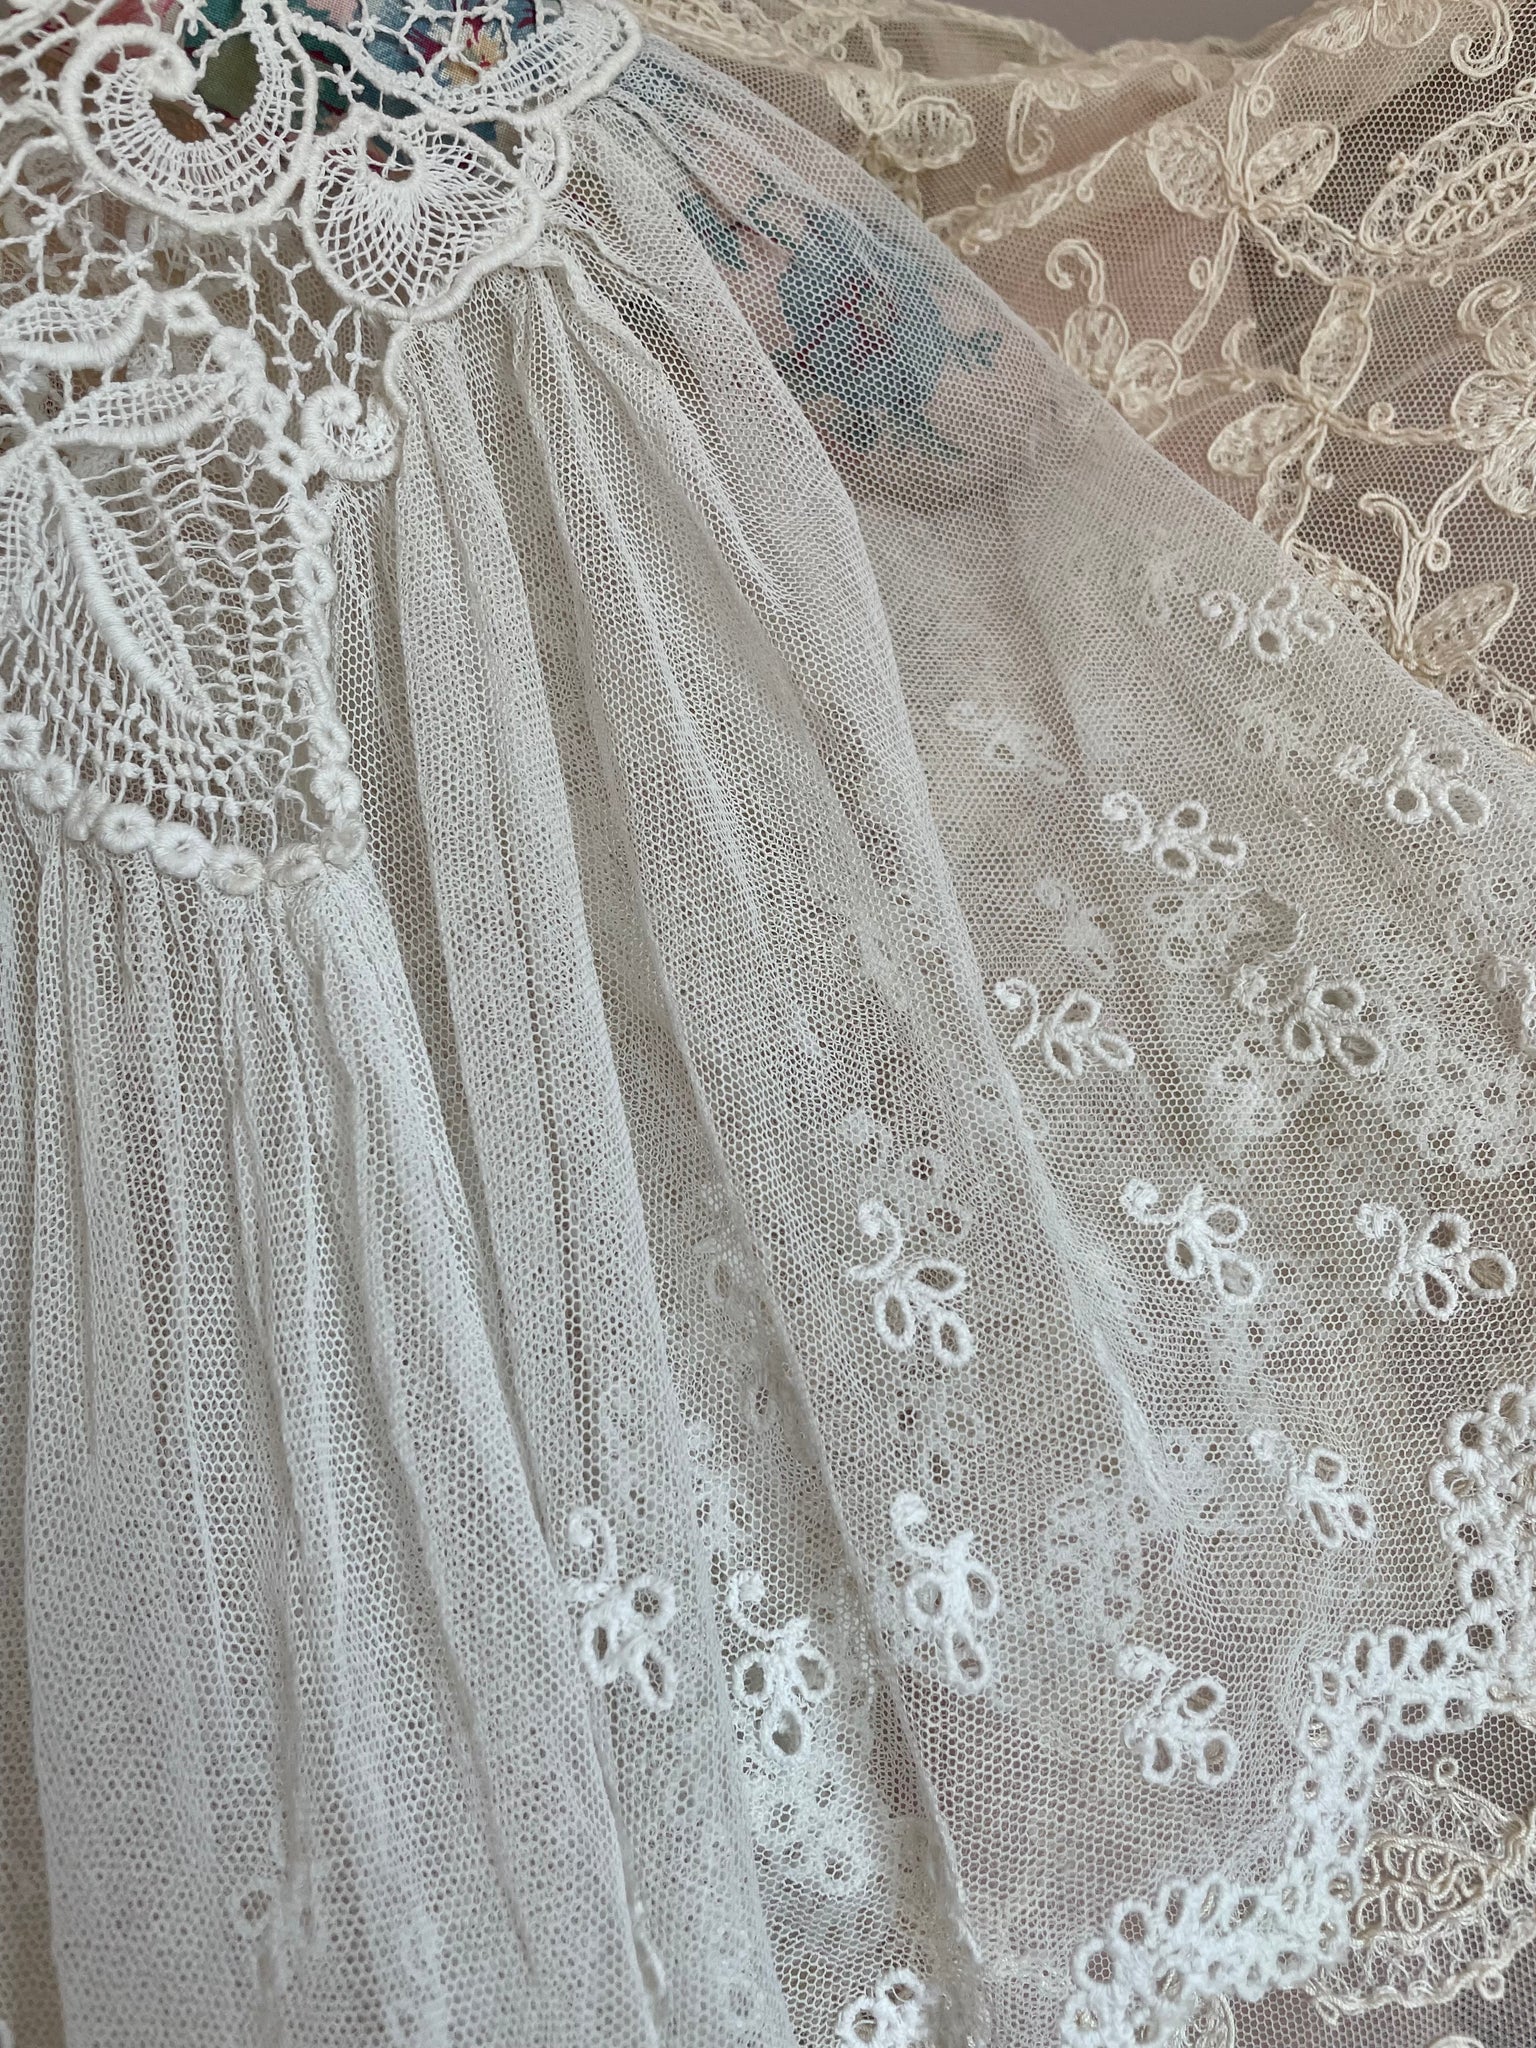 1900s Mesh Embroidered Floral Lace Capelet Net